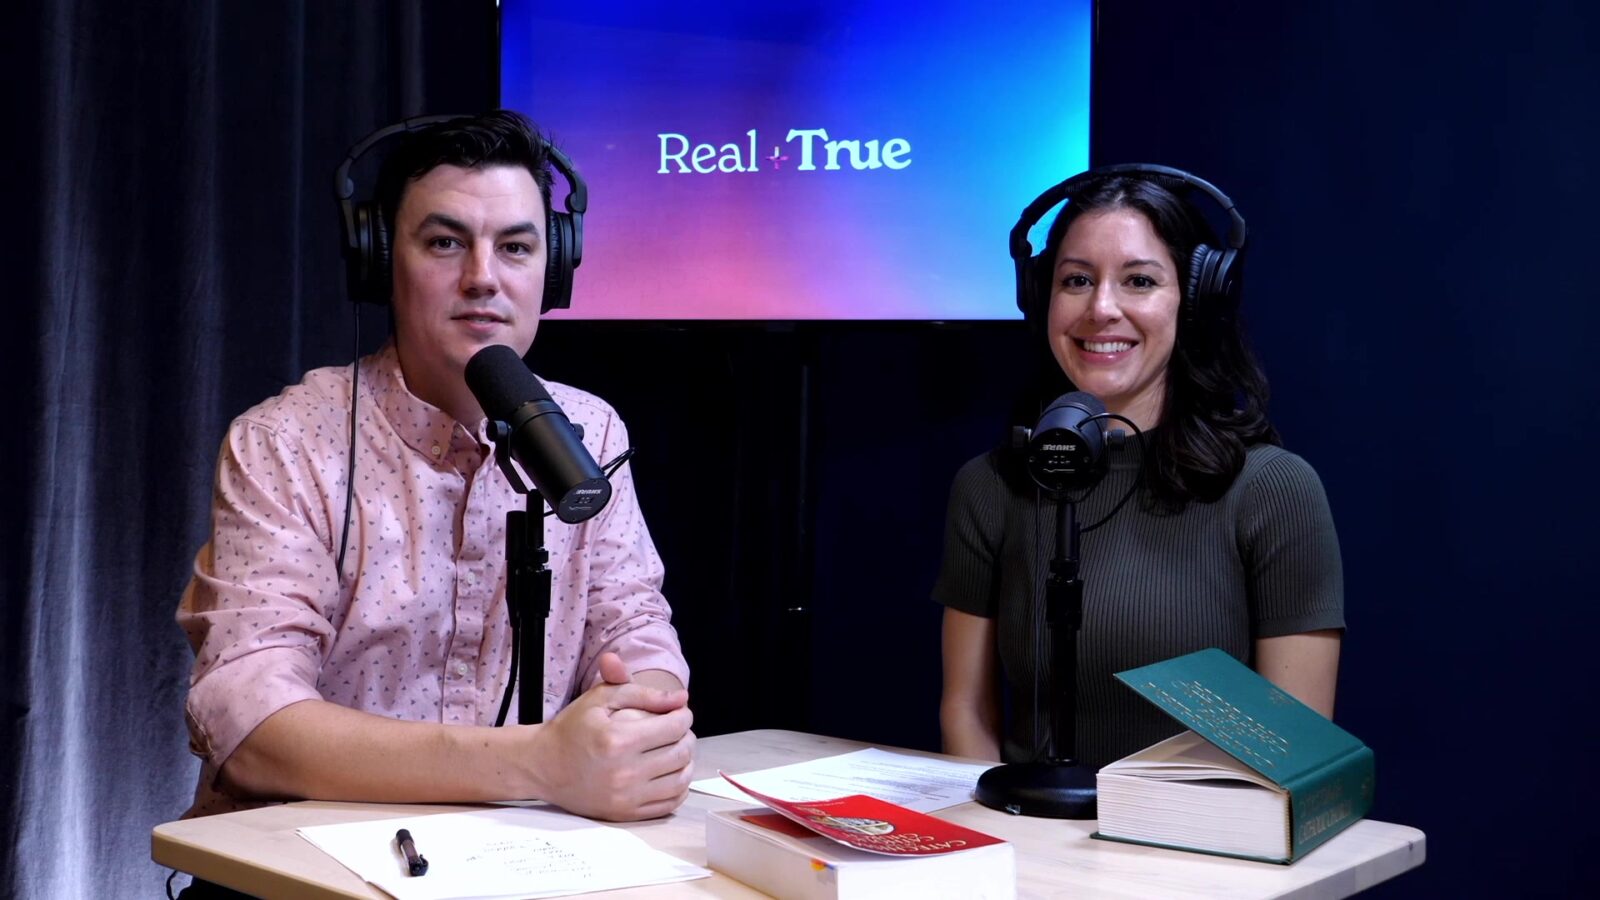 3 Ways You Can Support the Mission of Real + True